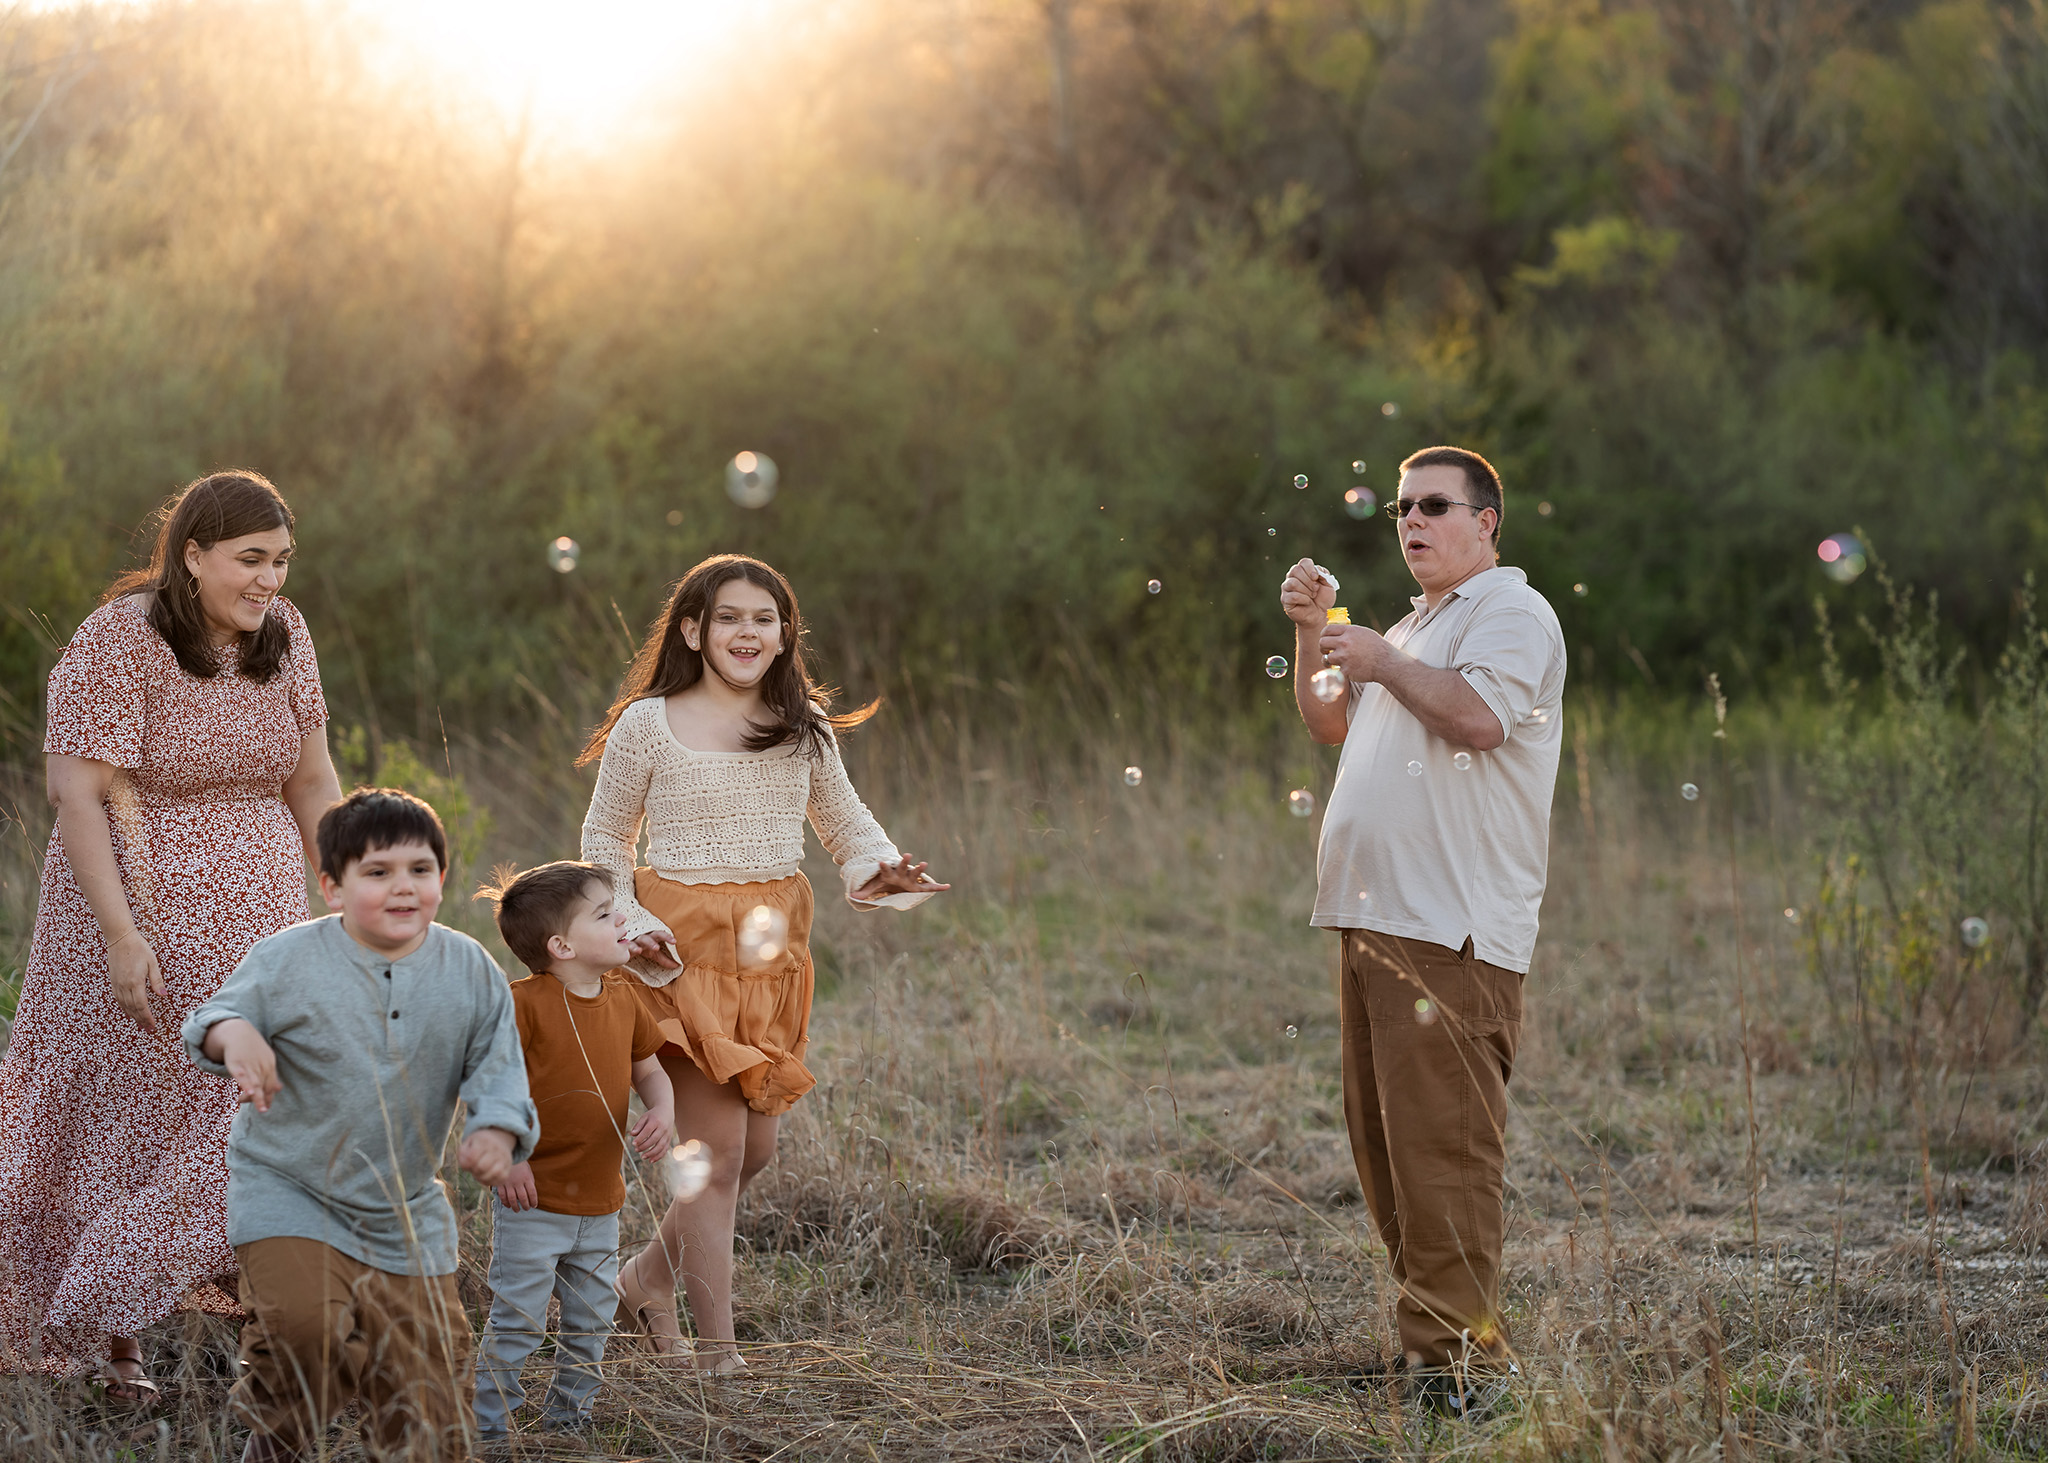 A dad blows bubbles for his three children to chase in a park at sunset with mom after meeting babysitters nj